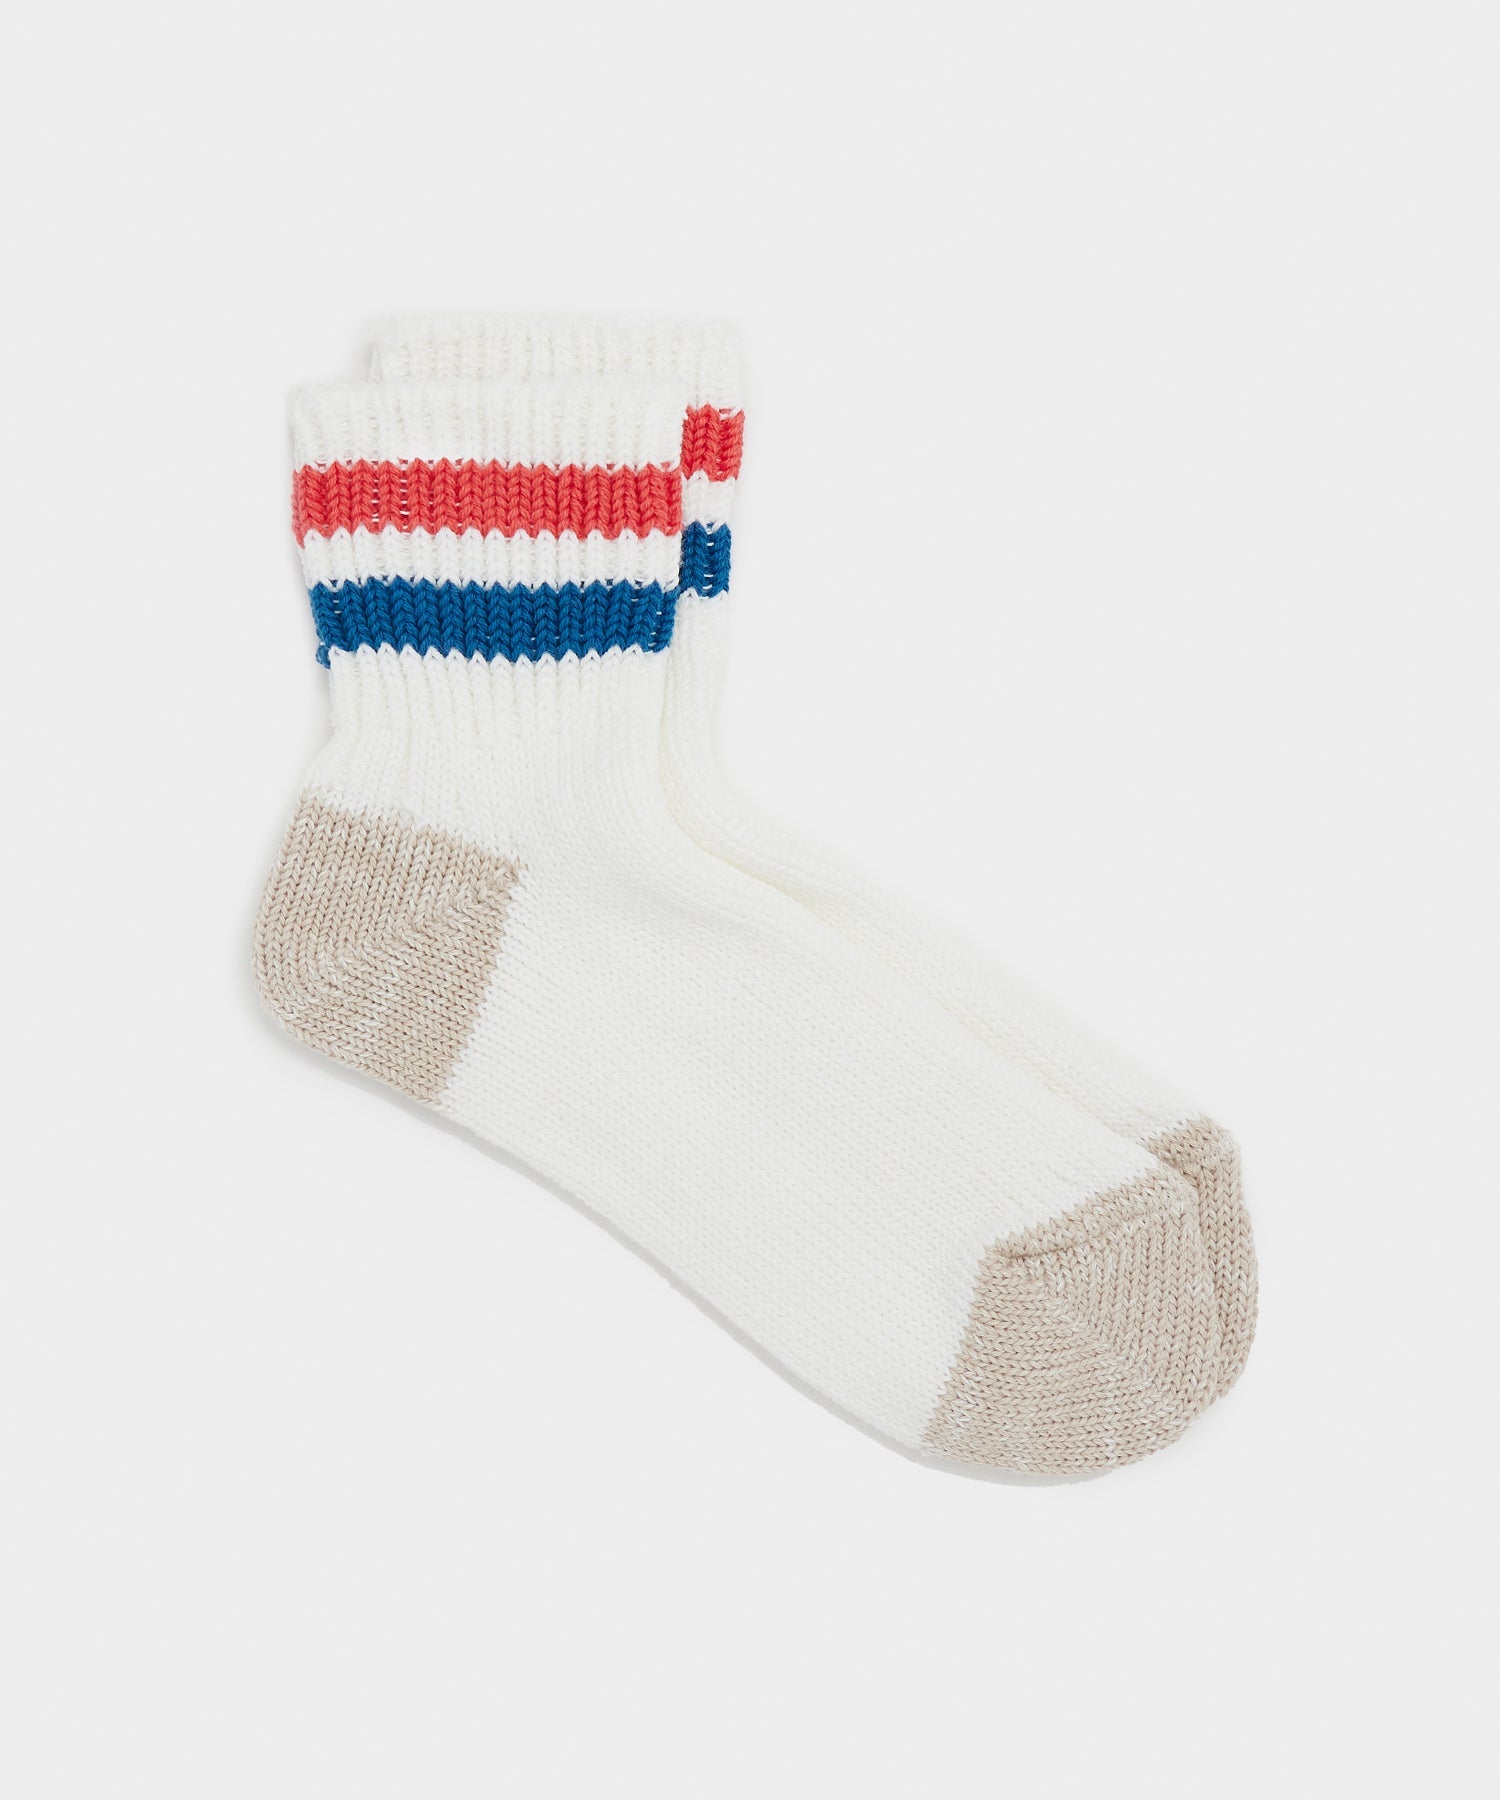 Rototo Old School Ankle Sock in Red/Blue